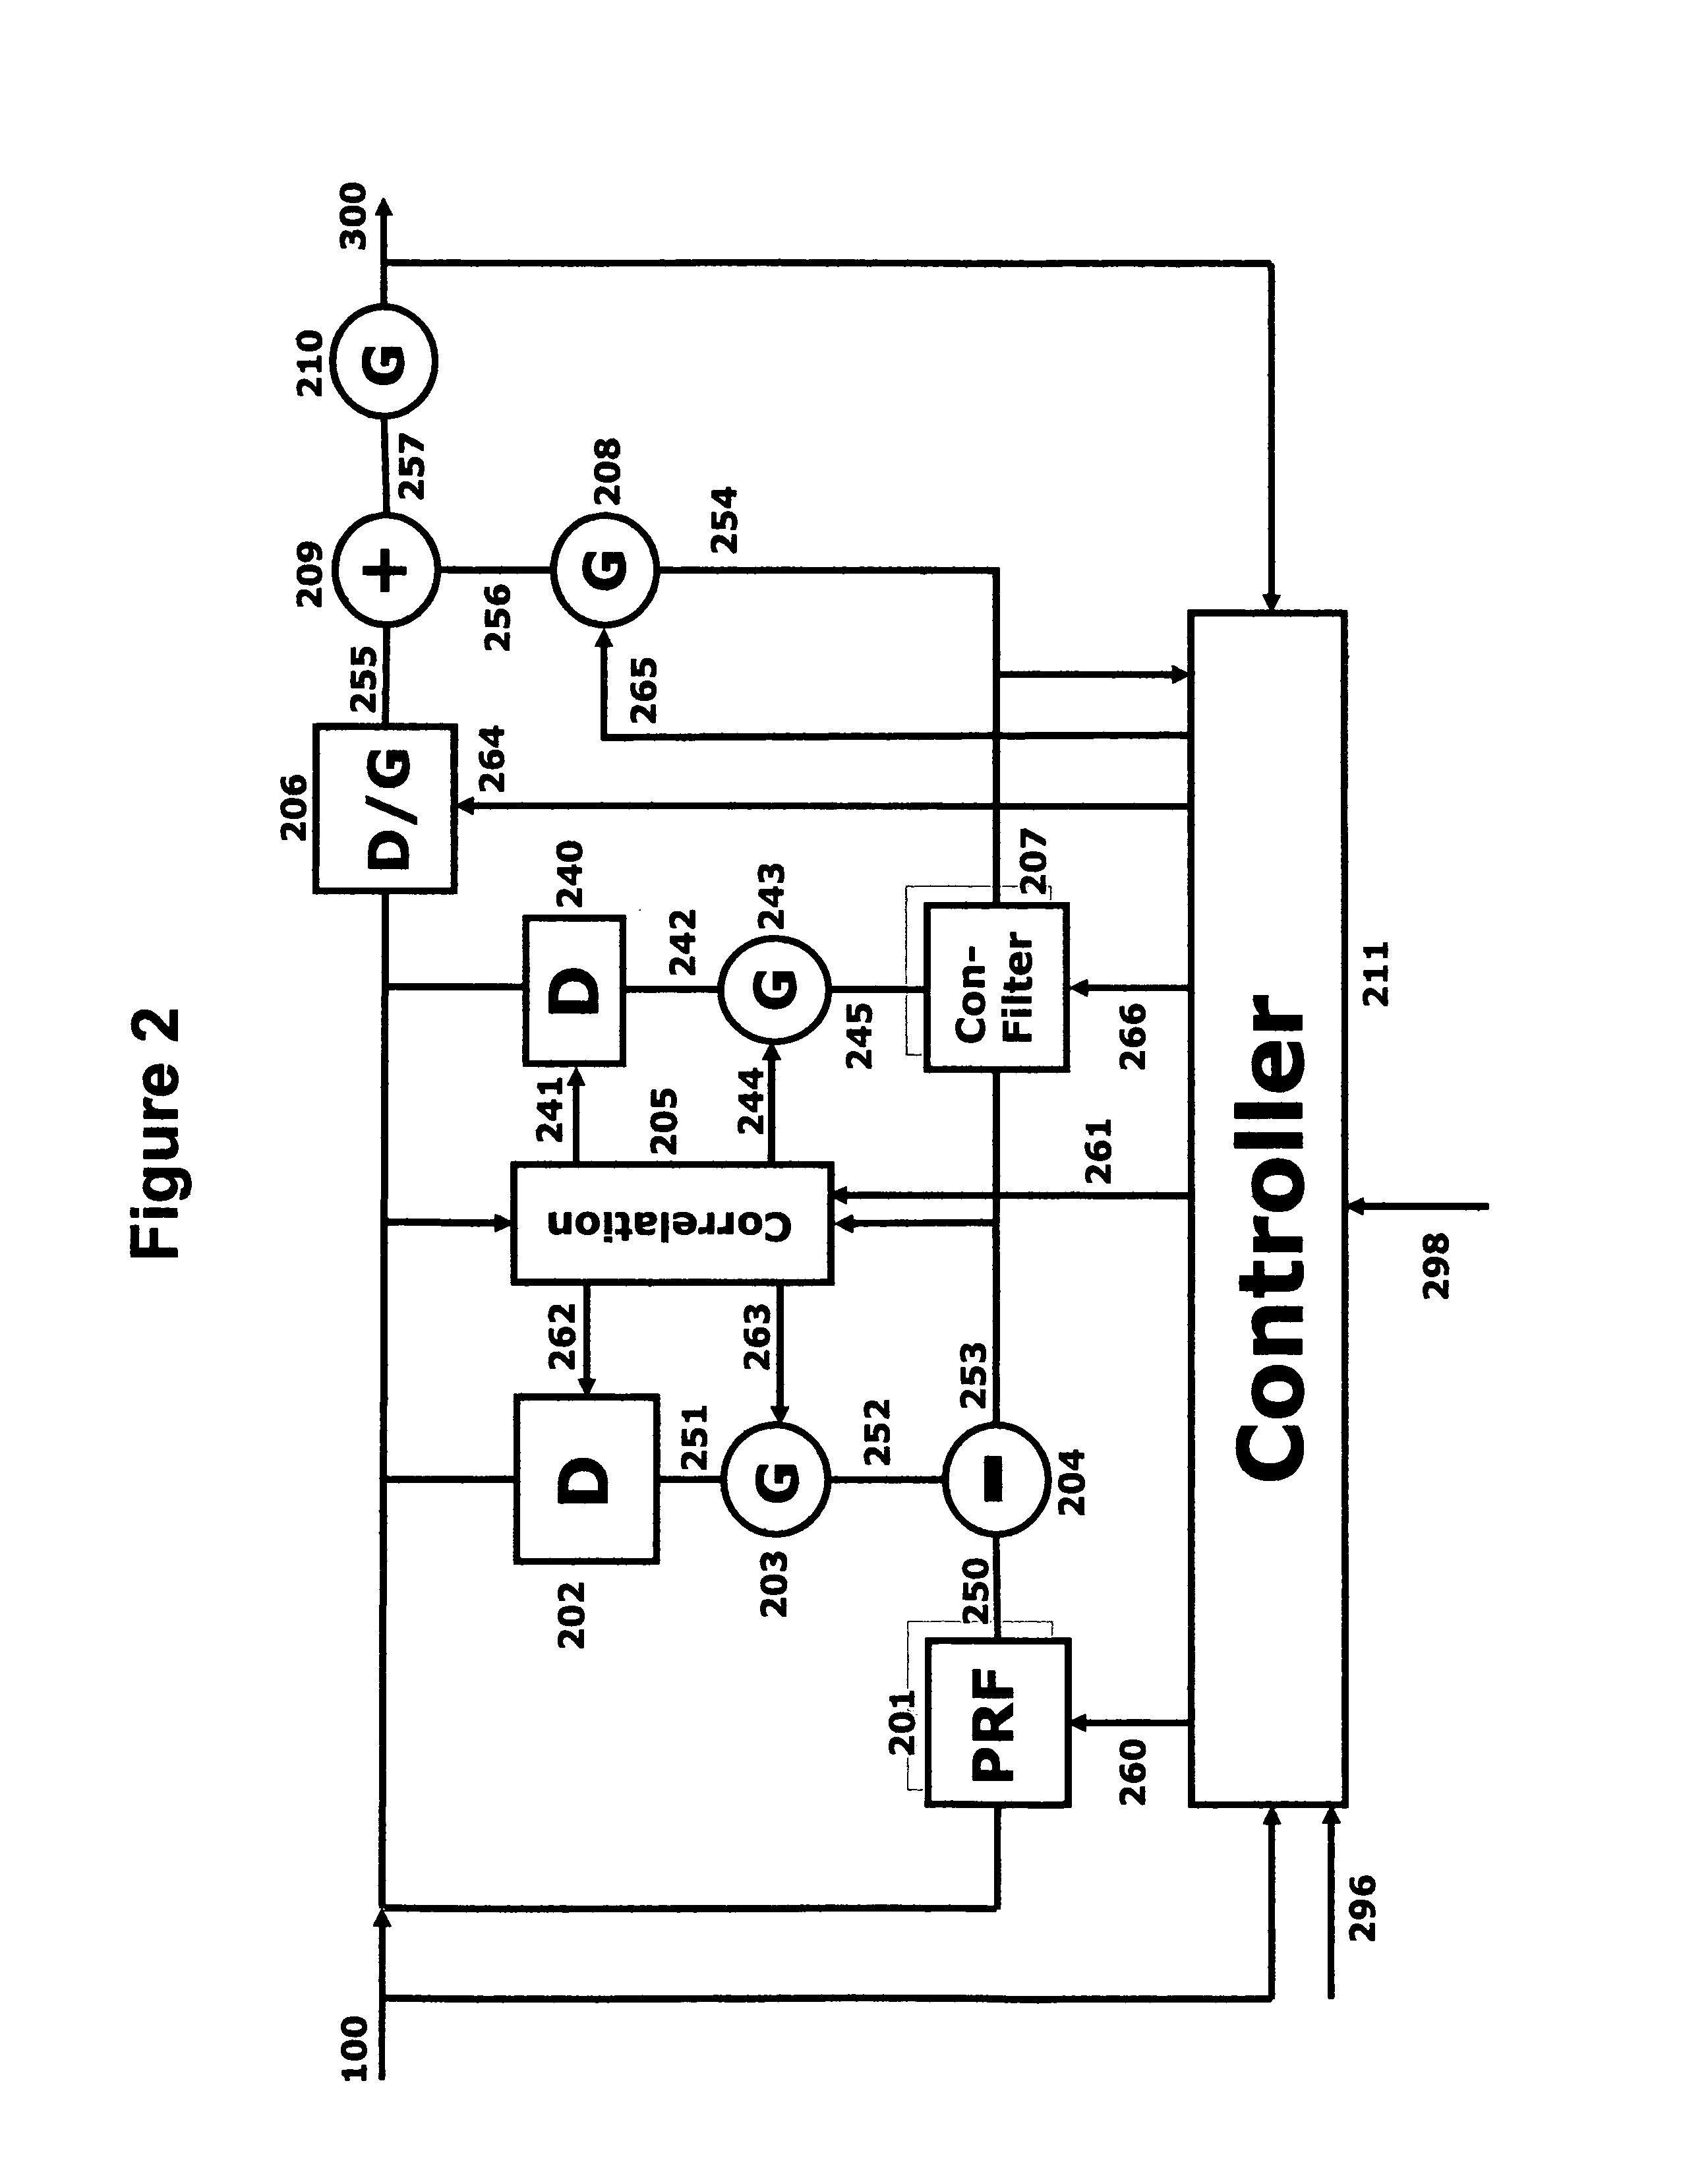 Equalizer filter with dynamically configurable convolution filter